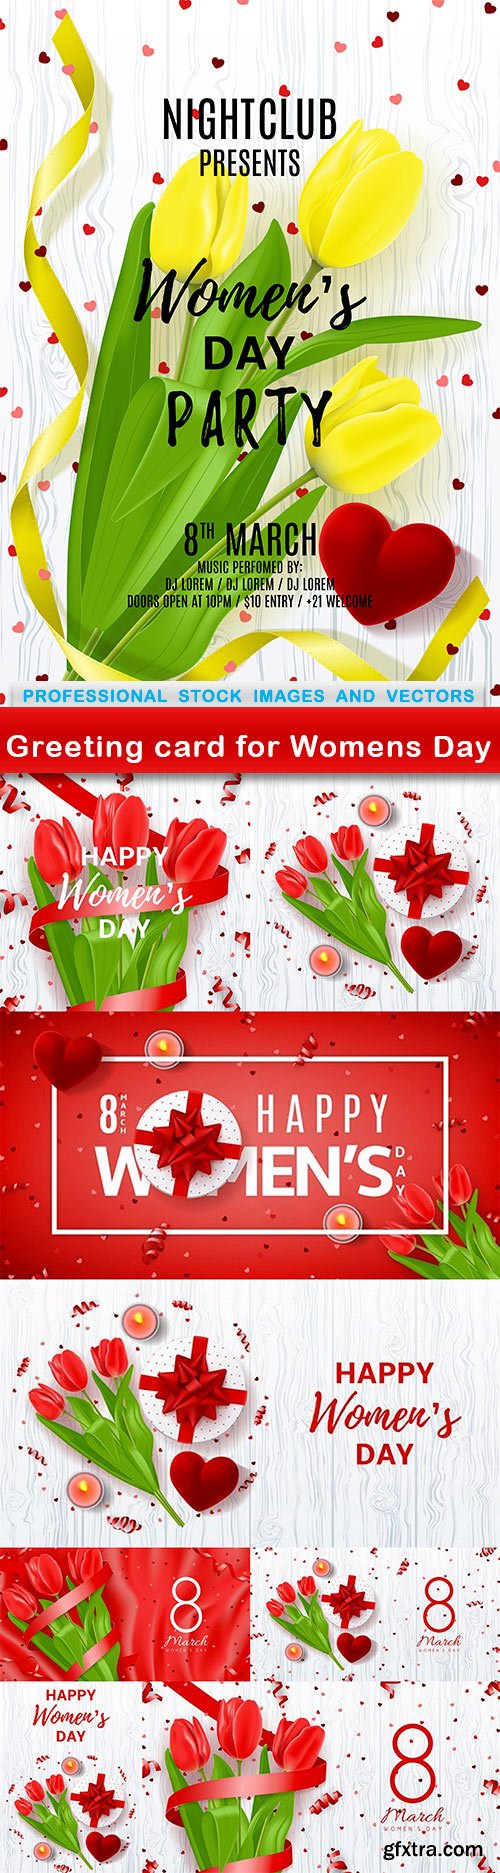 Greeting card for Womens Day - 9 EPS